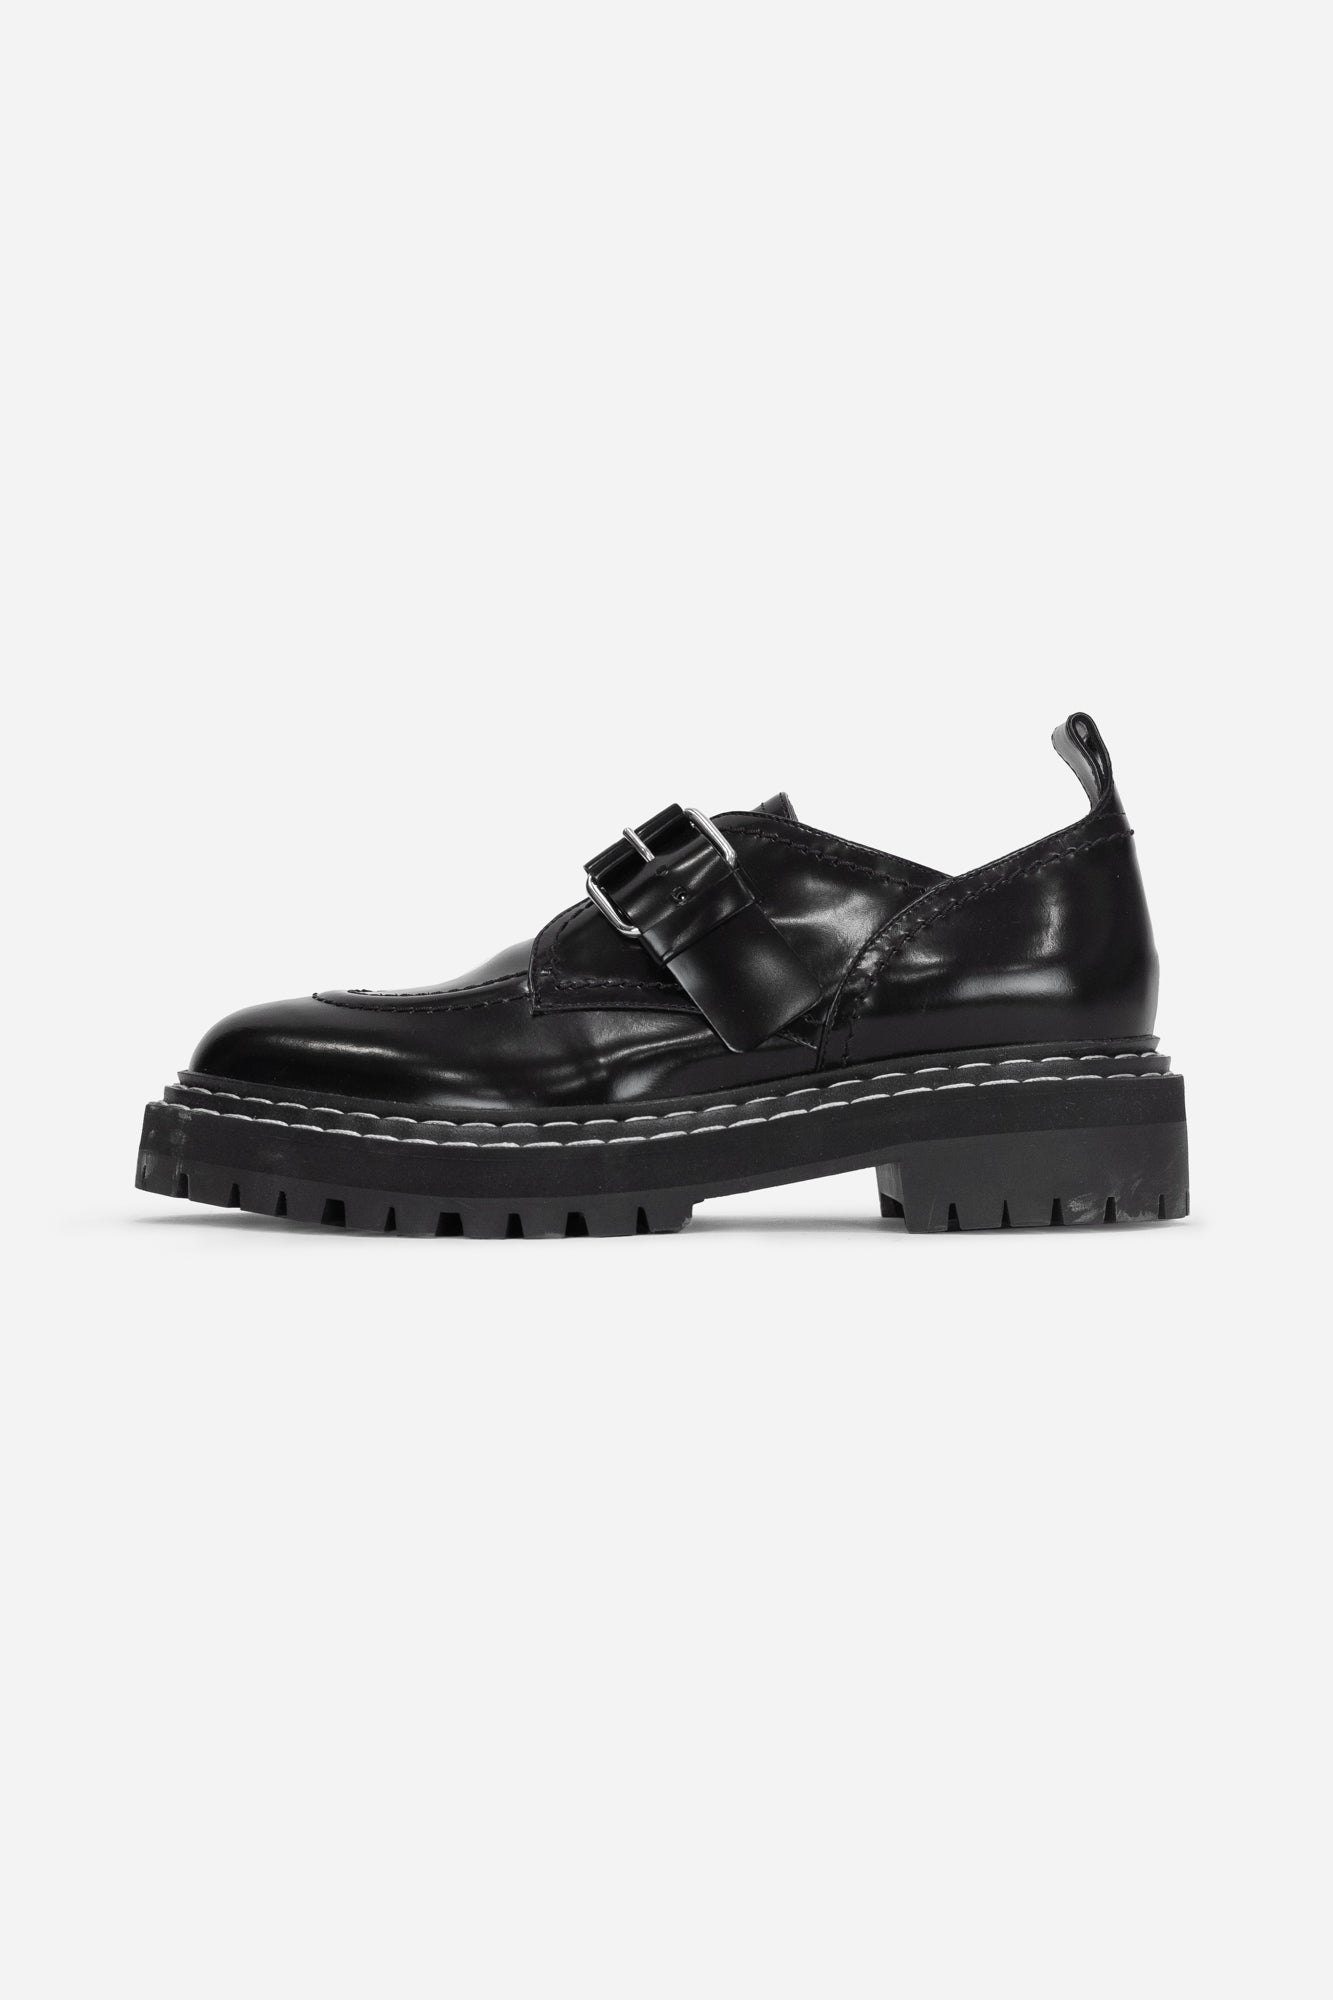 Black Buckles Chunky Loafer Silver HardWare